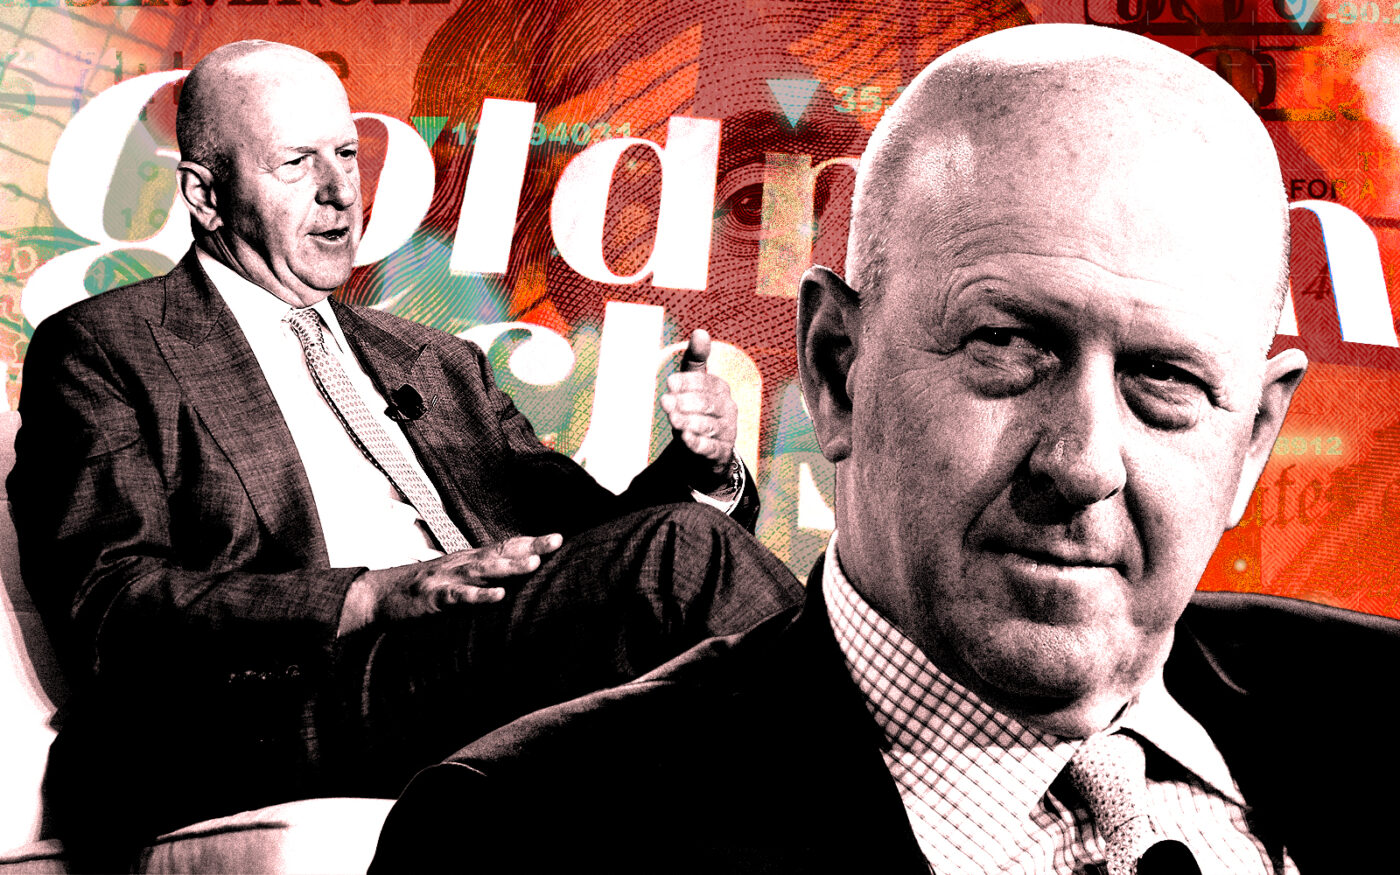 Goldman Sachs' David Solomon (Photo Illustration by Steven Dilakian for The Real Deal with Getty)